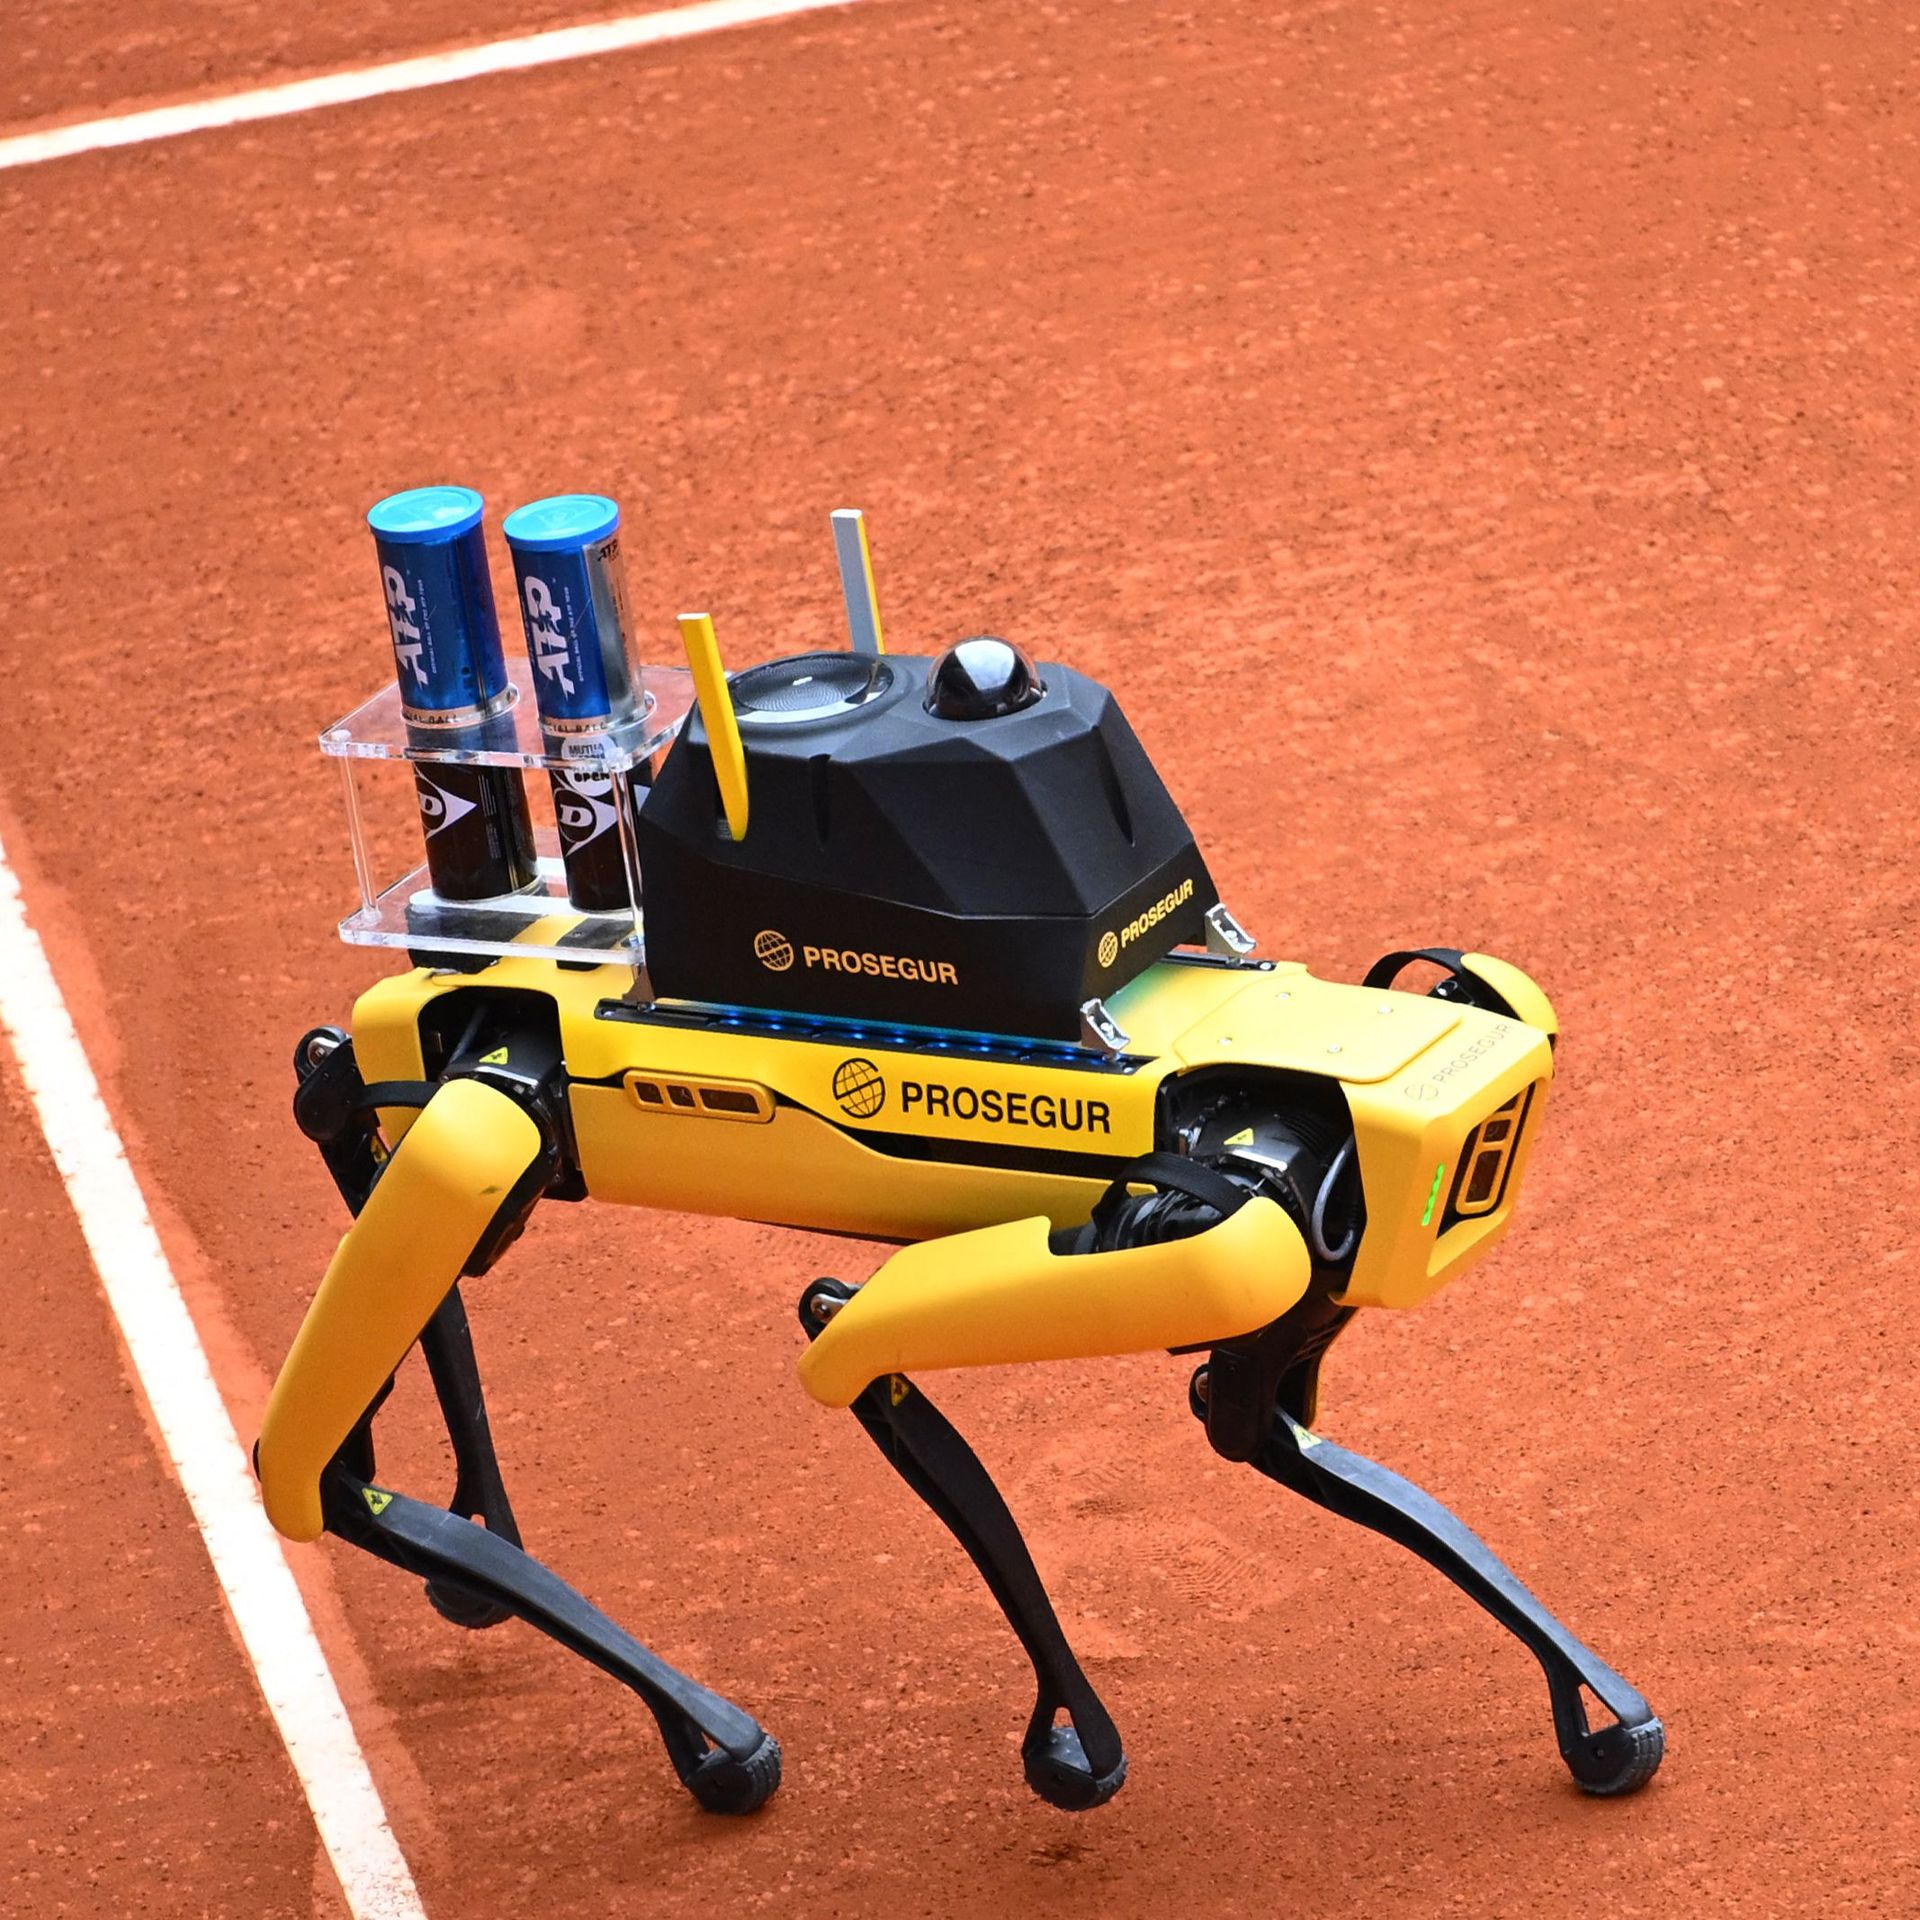 Water utilities use robots and dogs to liven up workplace - Blog